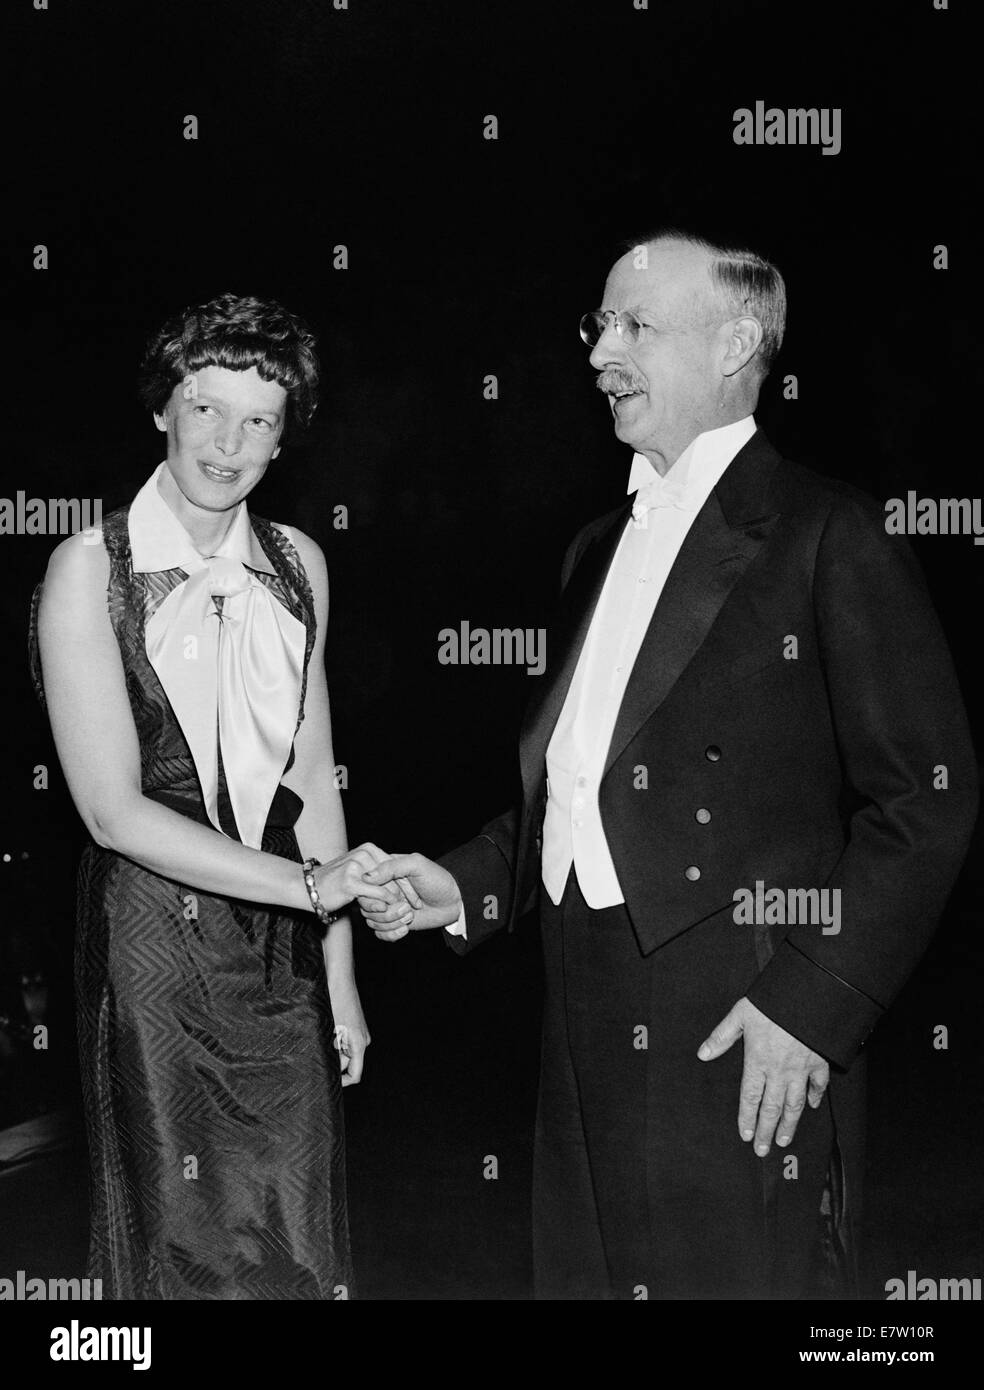 Vintage photo of American aviation pioneer and author Amelia Earhart (1897 – declared dead 1939) – Earhart and her navigator Fred Noonan famously vanished in 1937 while she was trying to become the first female to complete a circumnavigational flight of the globe. Earhart is pictured in 1935 with Gilbert Grosvenor, Editor of National Geographic magazine and President of the National Geographic Society. Stock Photo